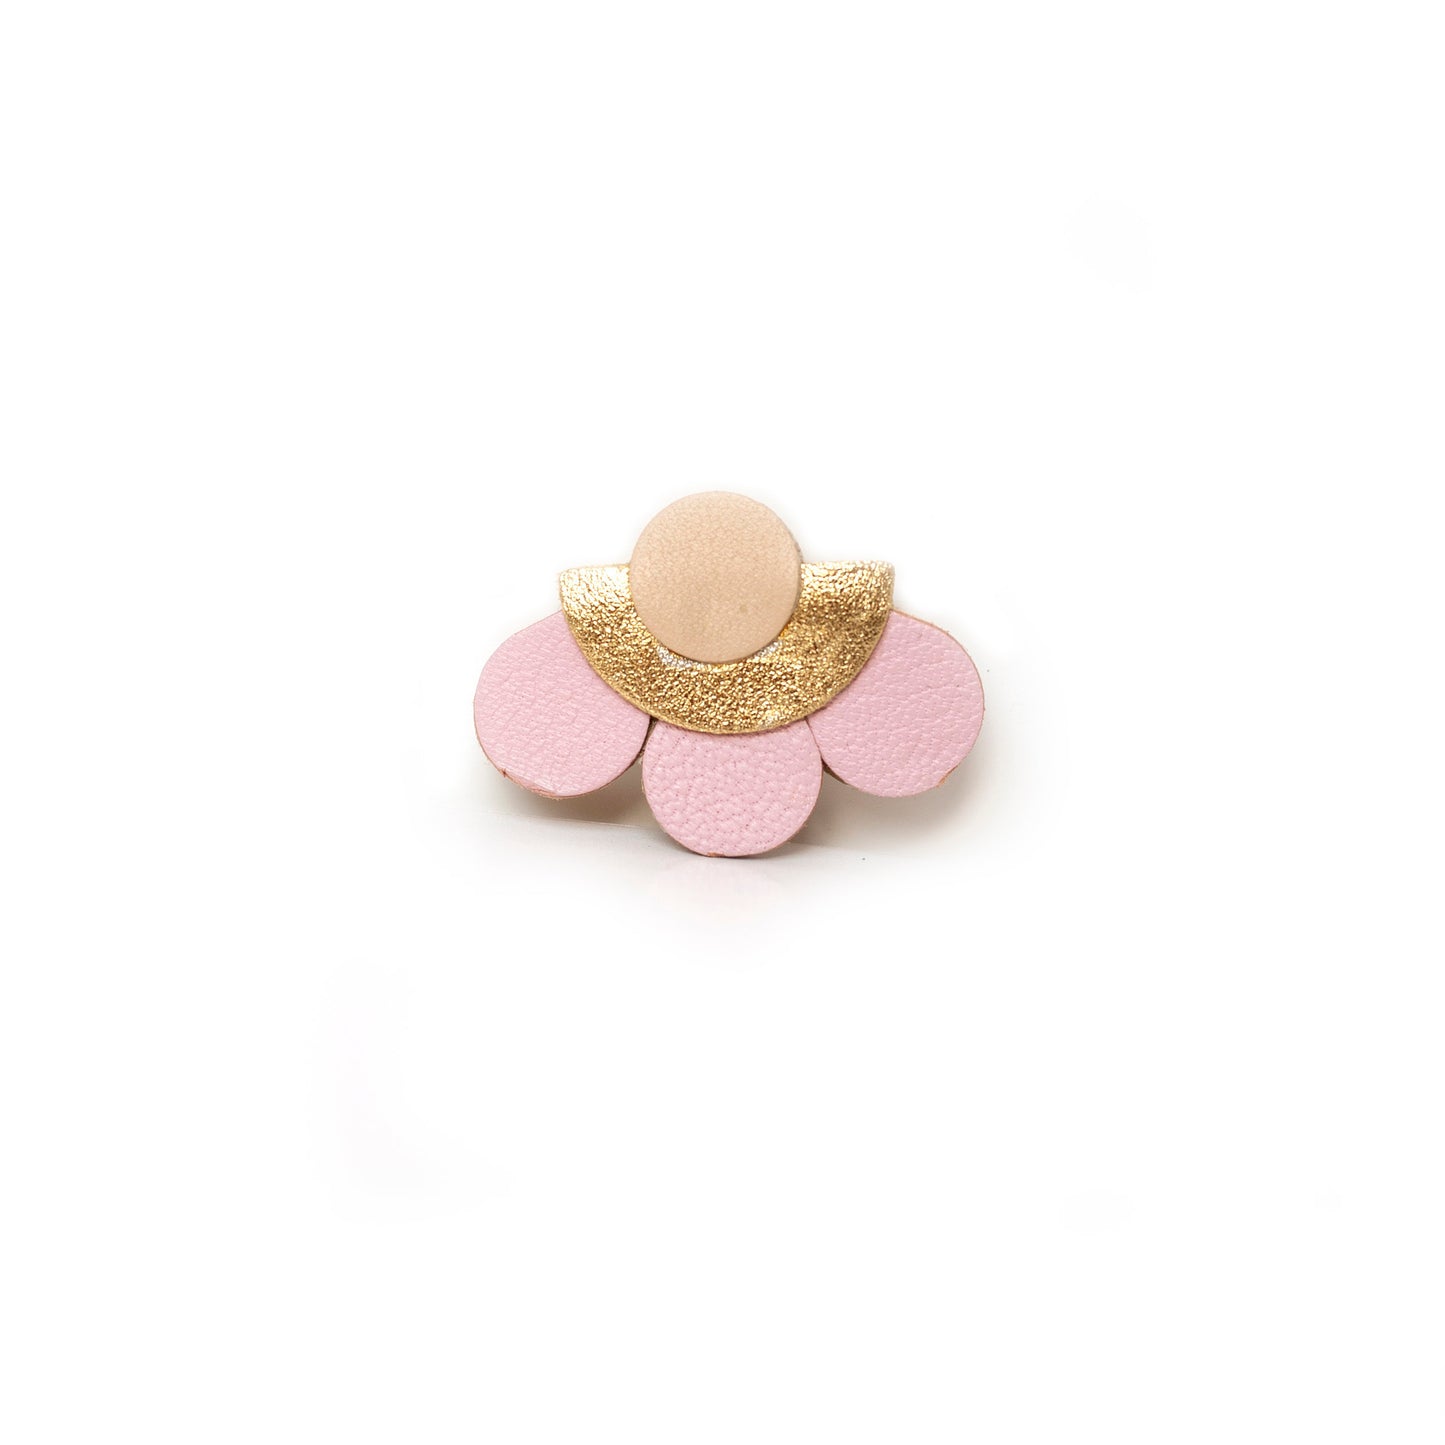 Flower brooch in pink, beige and gold leather